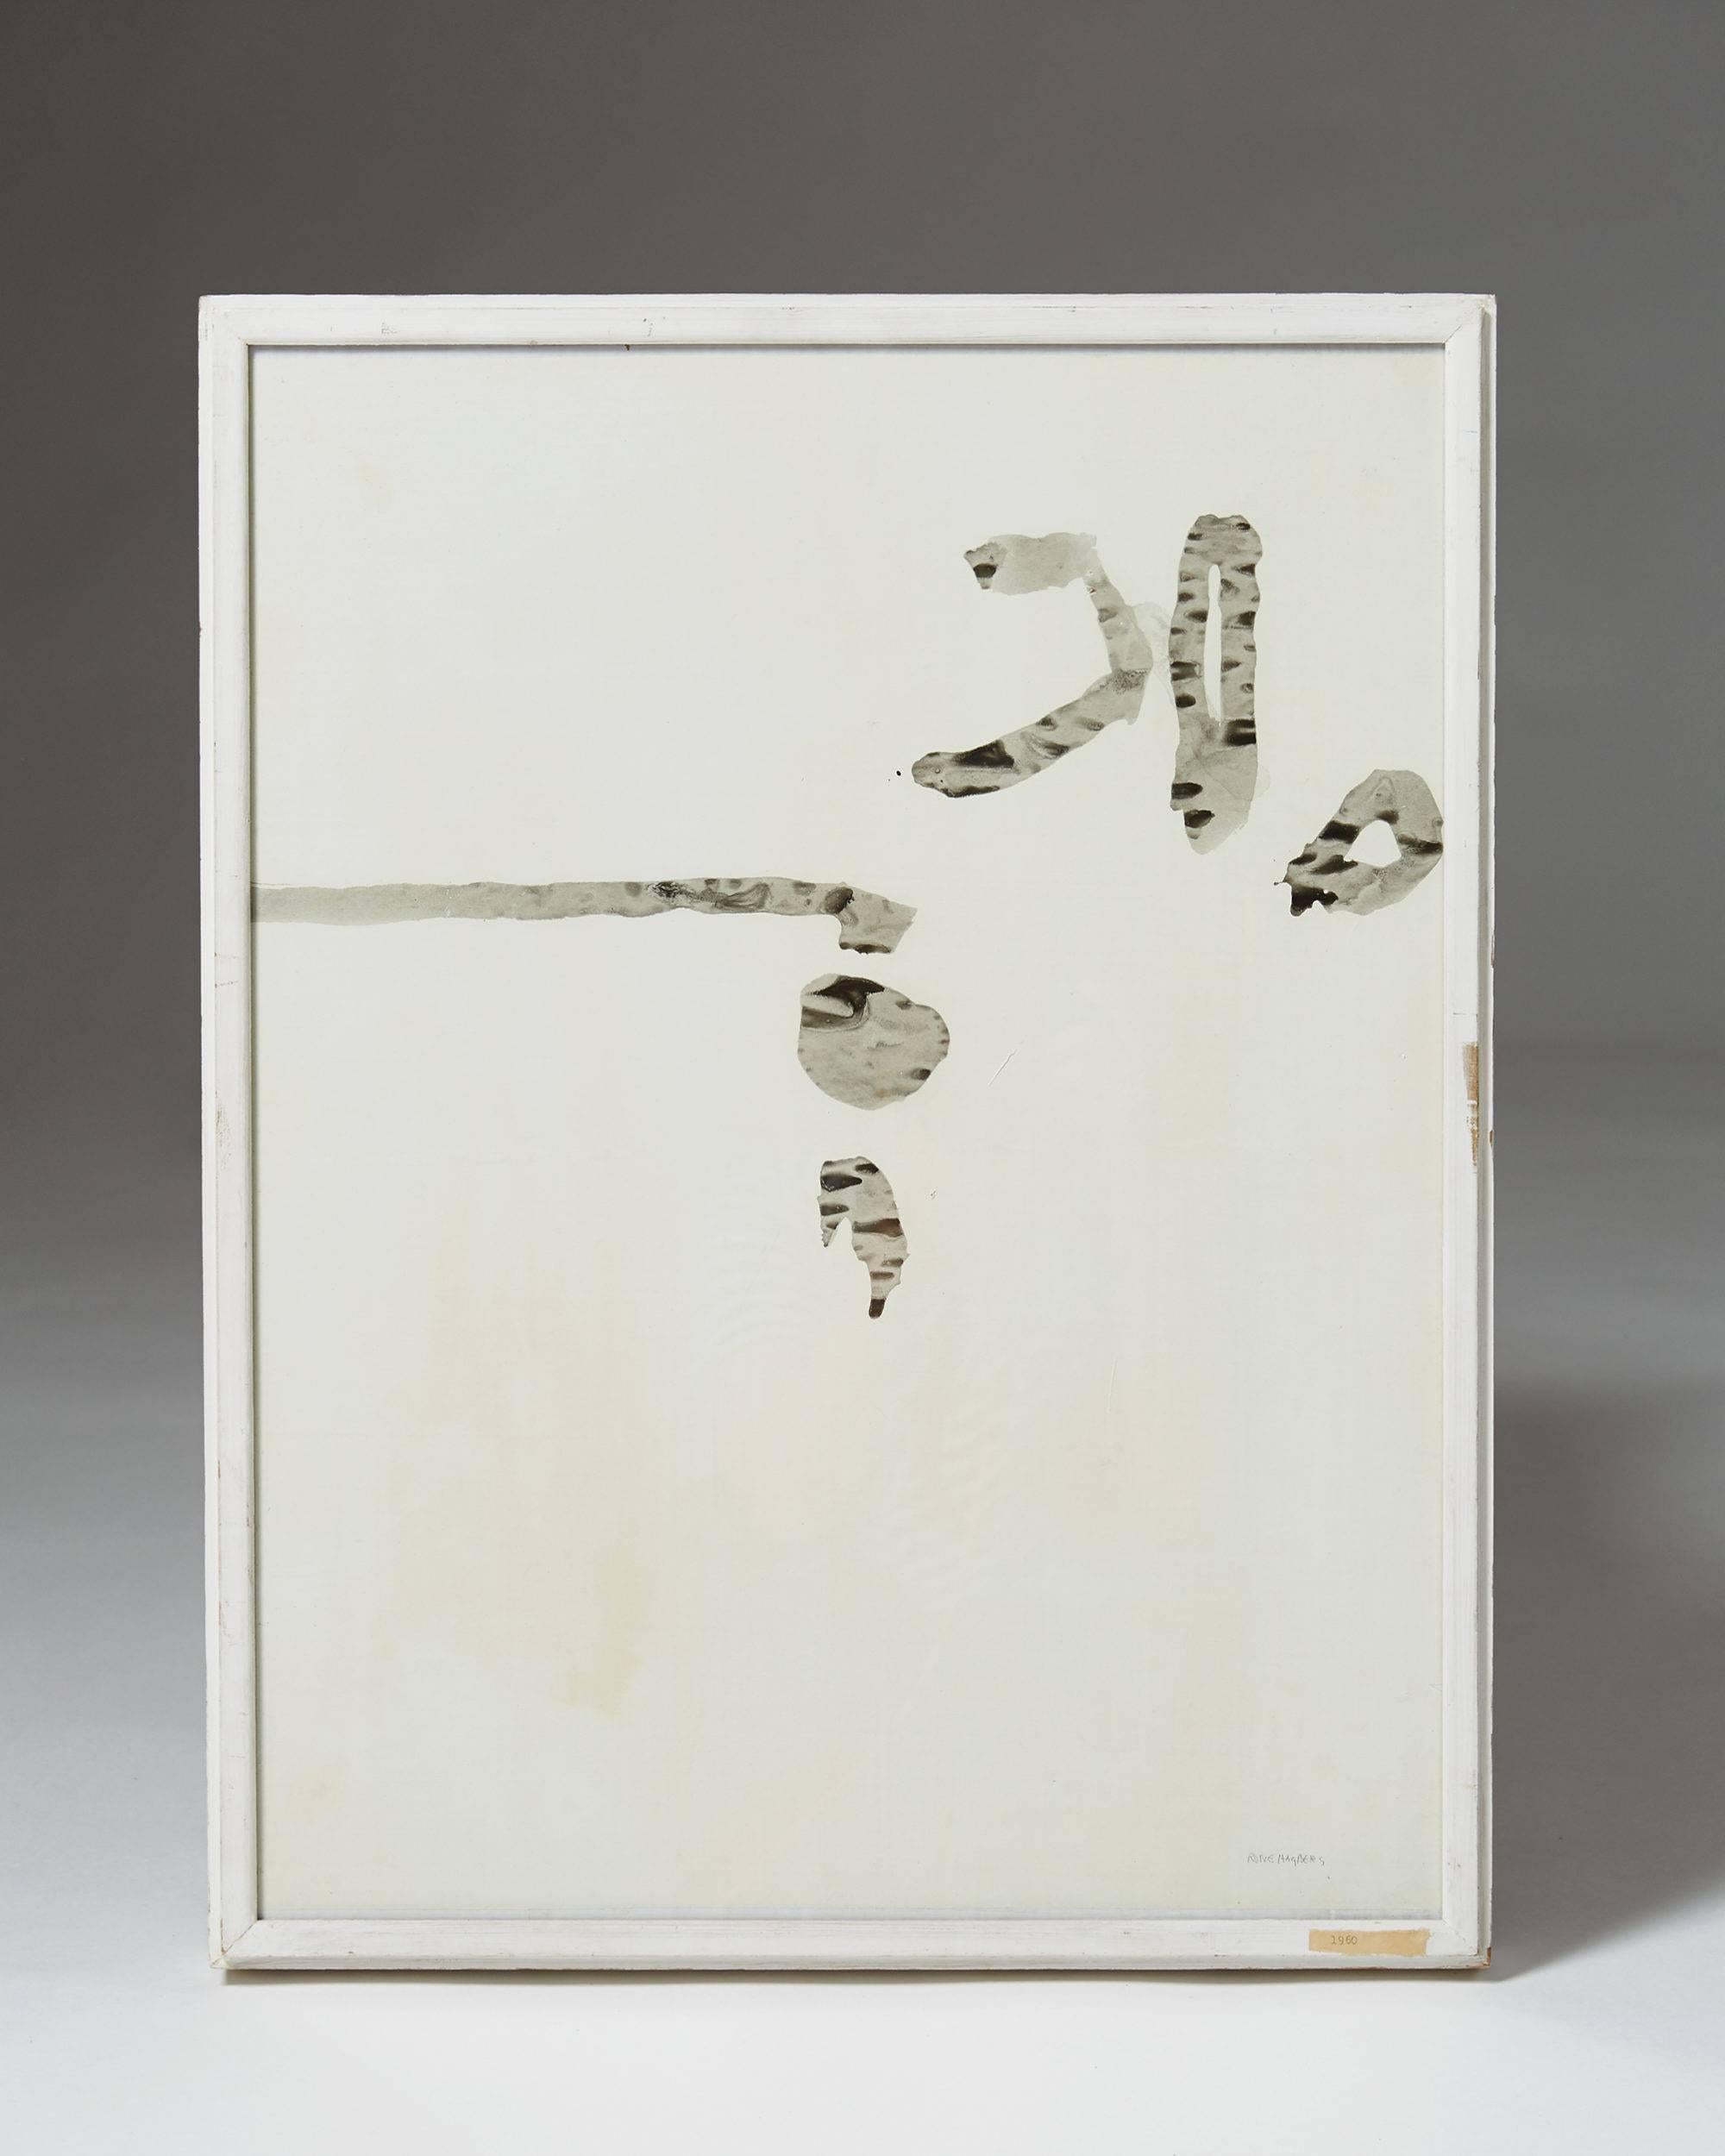 Painting by Rune Hagberg, Sweden.
1960.

Ink on paper, signed.

Measures: H 65 cm/ 2' 2